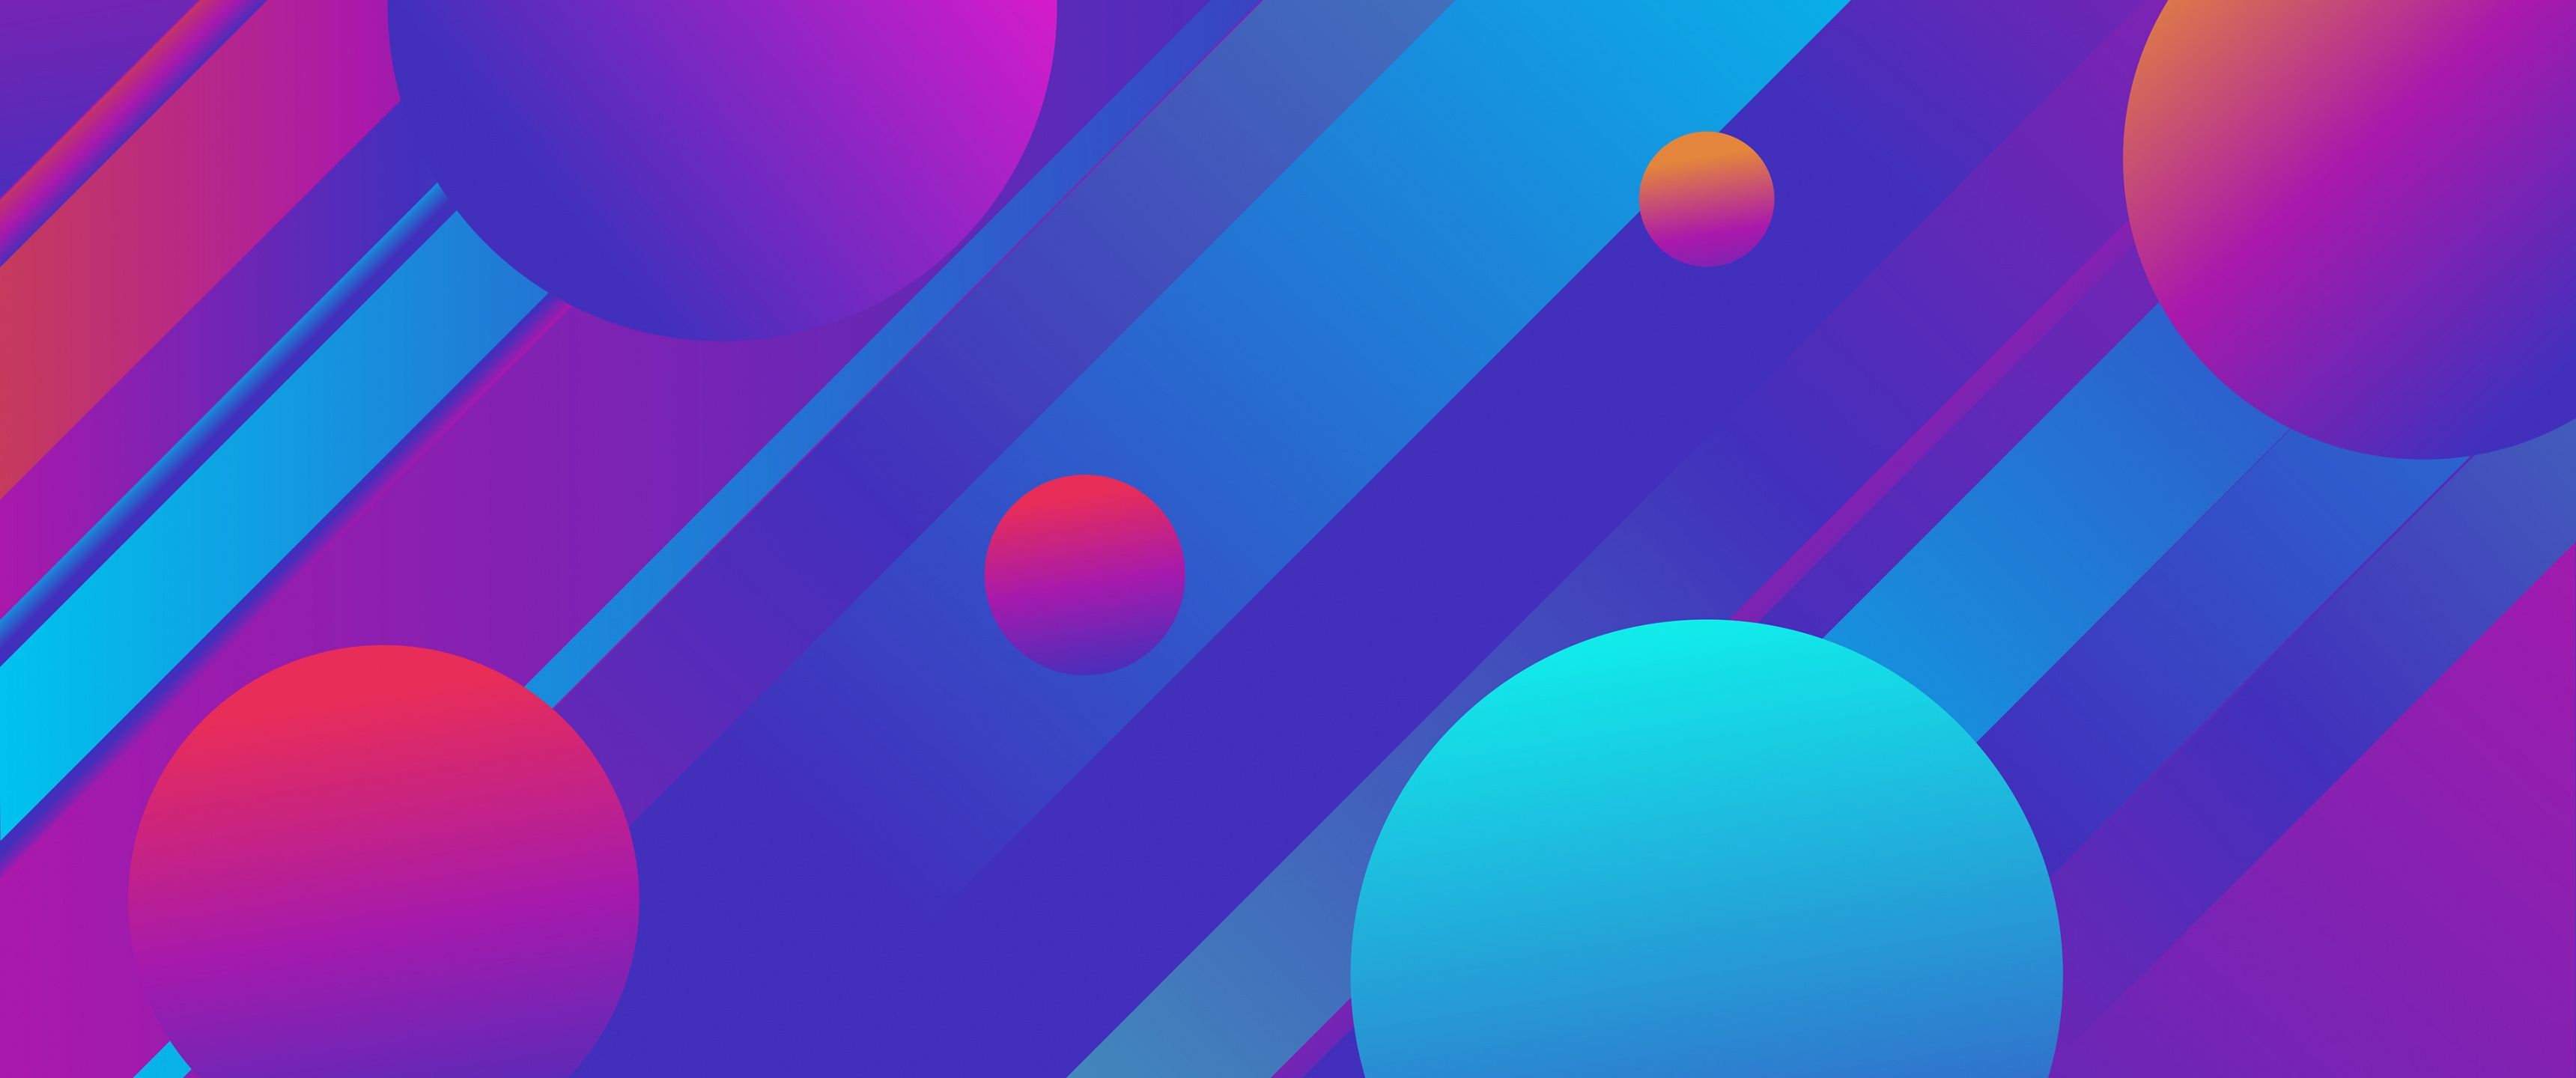 3D background Wallpaper 4K, Gradients, Colorful, Abstract, #1192